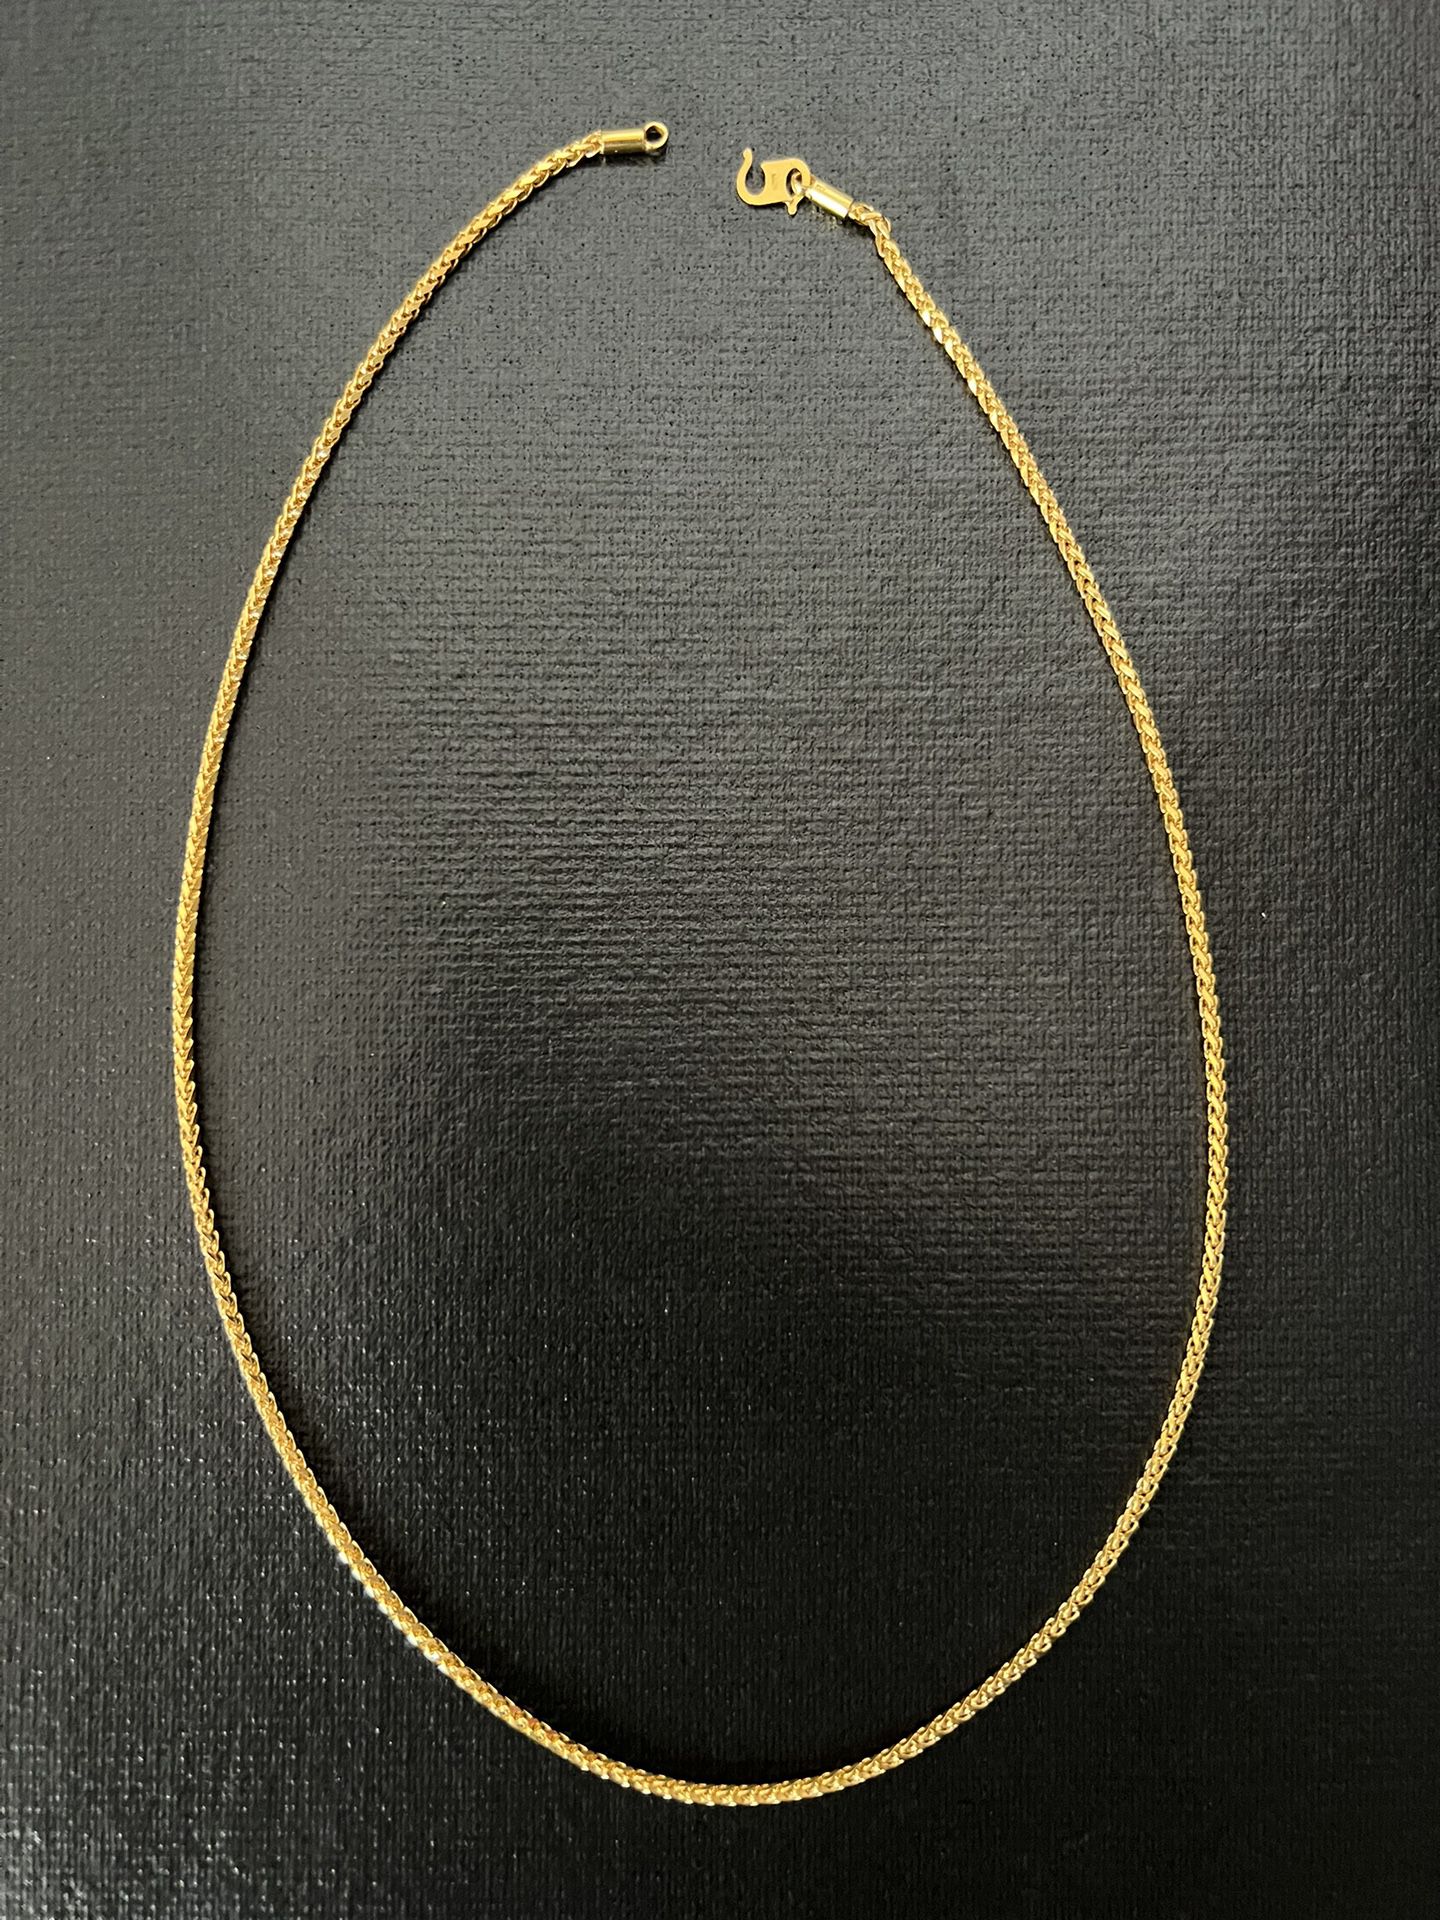 22k Gold Wheat Link Chain